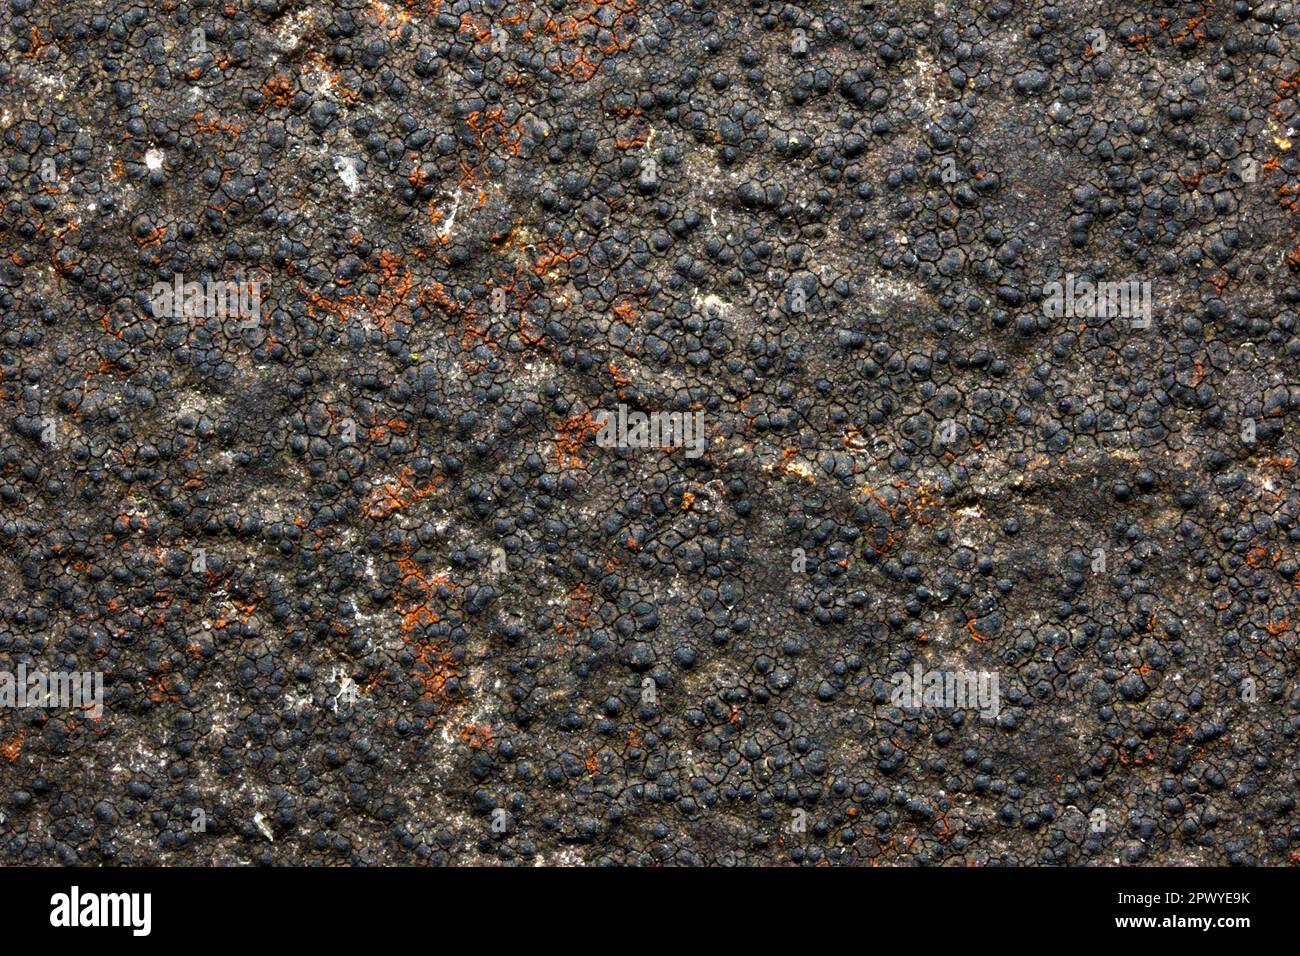 Verrucaria nigrescens is a crustose lichen common on calcareous rocks, walls and mortar. It appears to have global distribution. Stock Photo